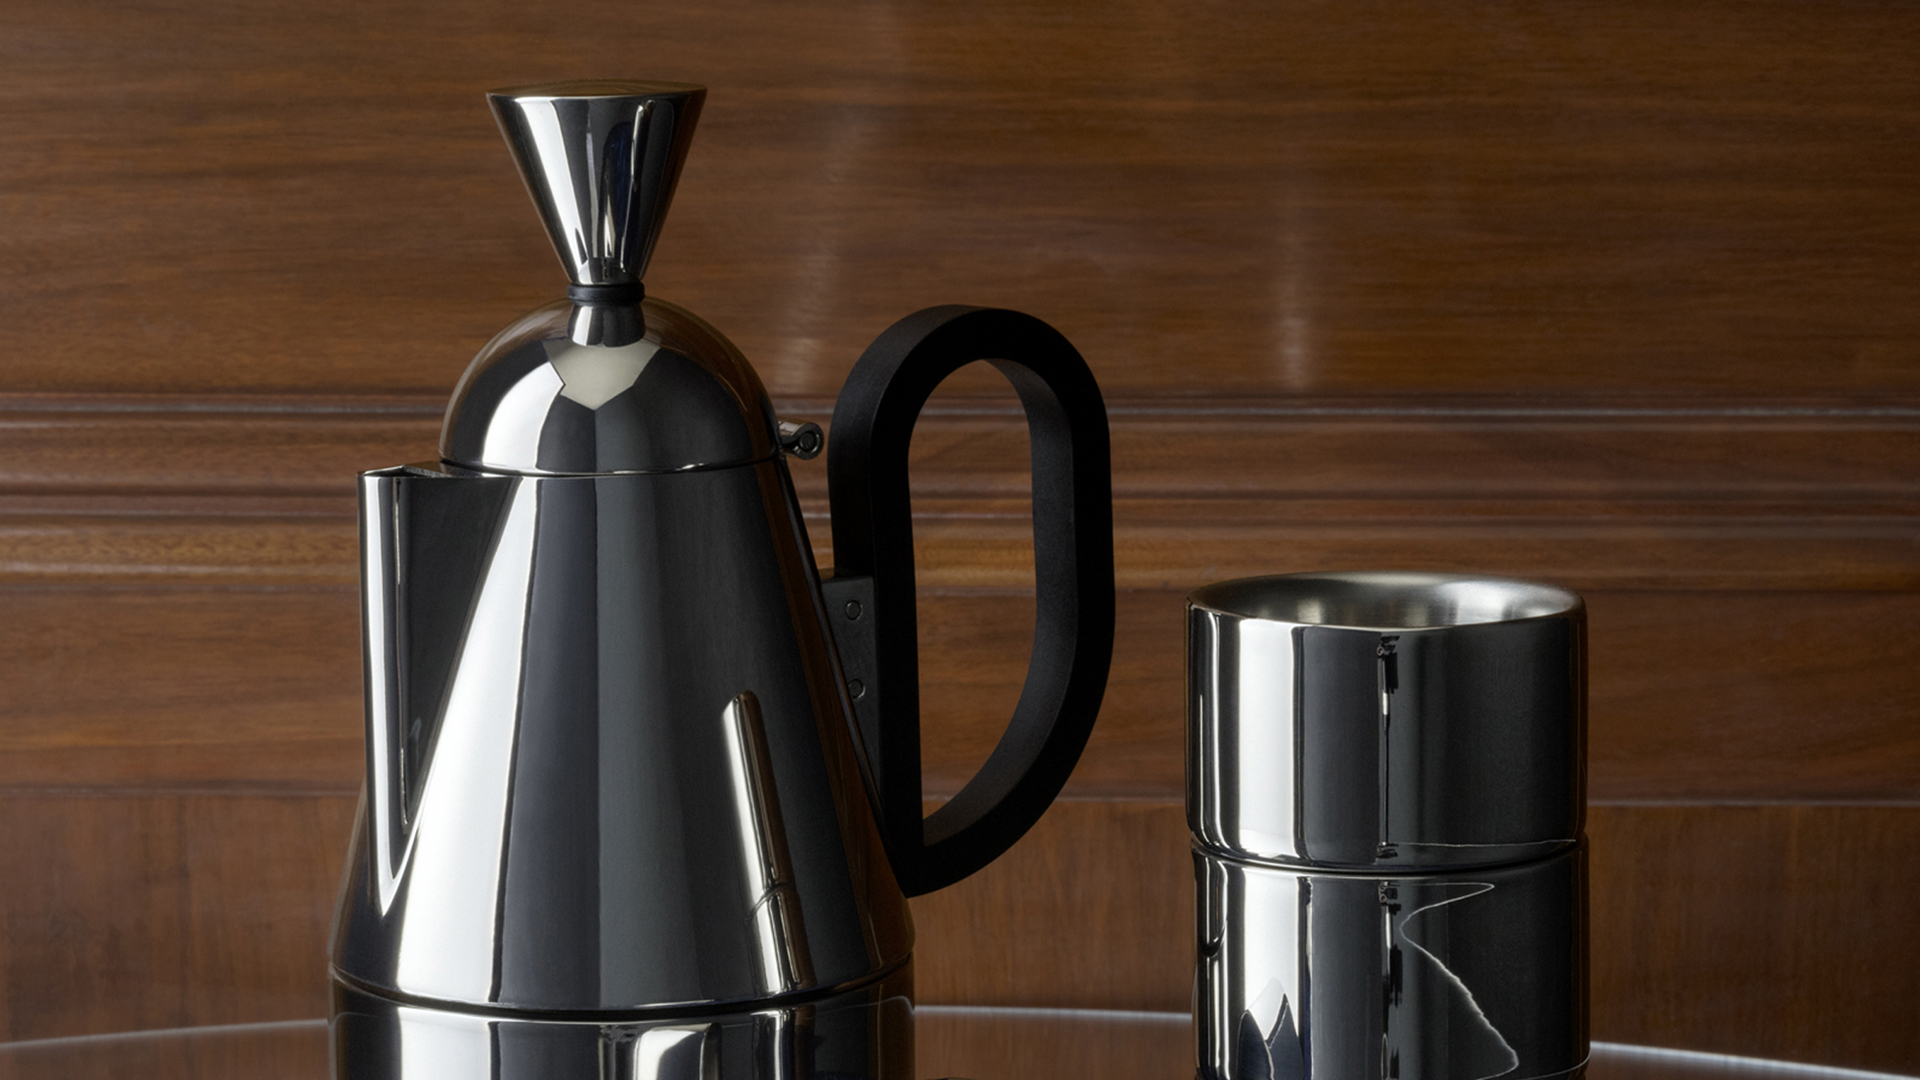 Brew Stove Top Coffee Maker, Lifestyle